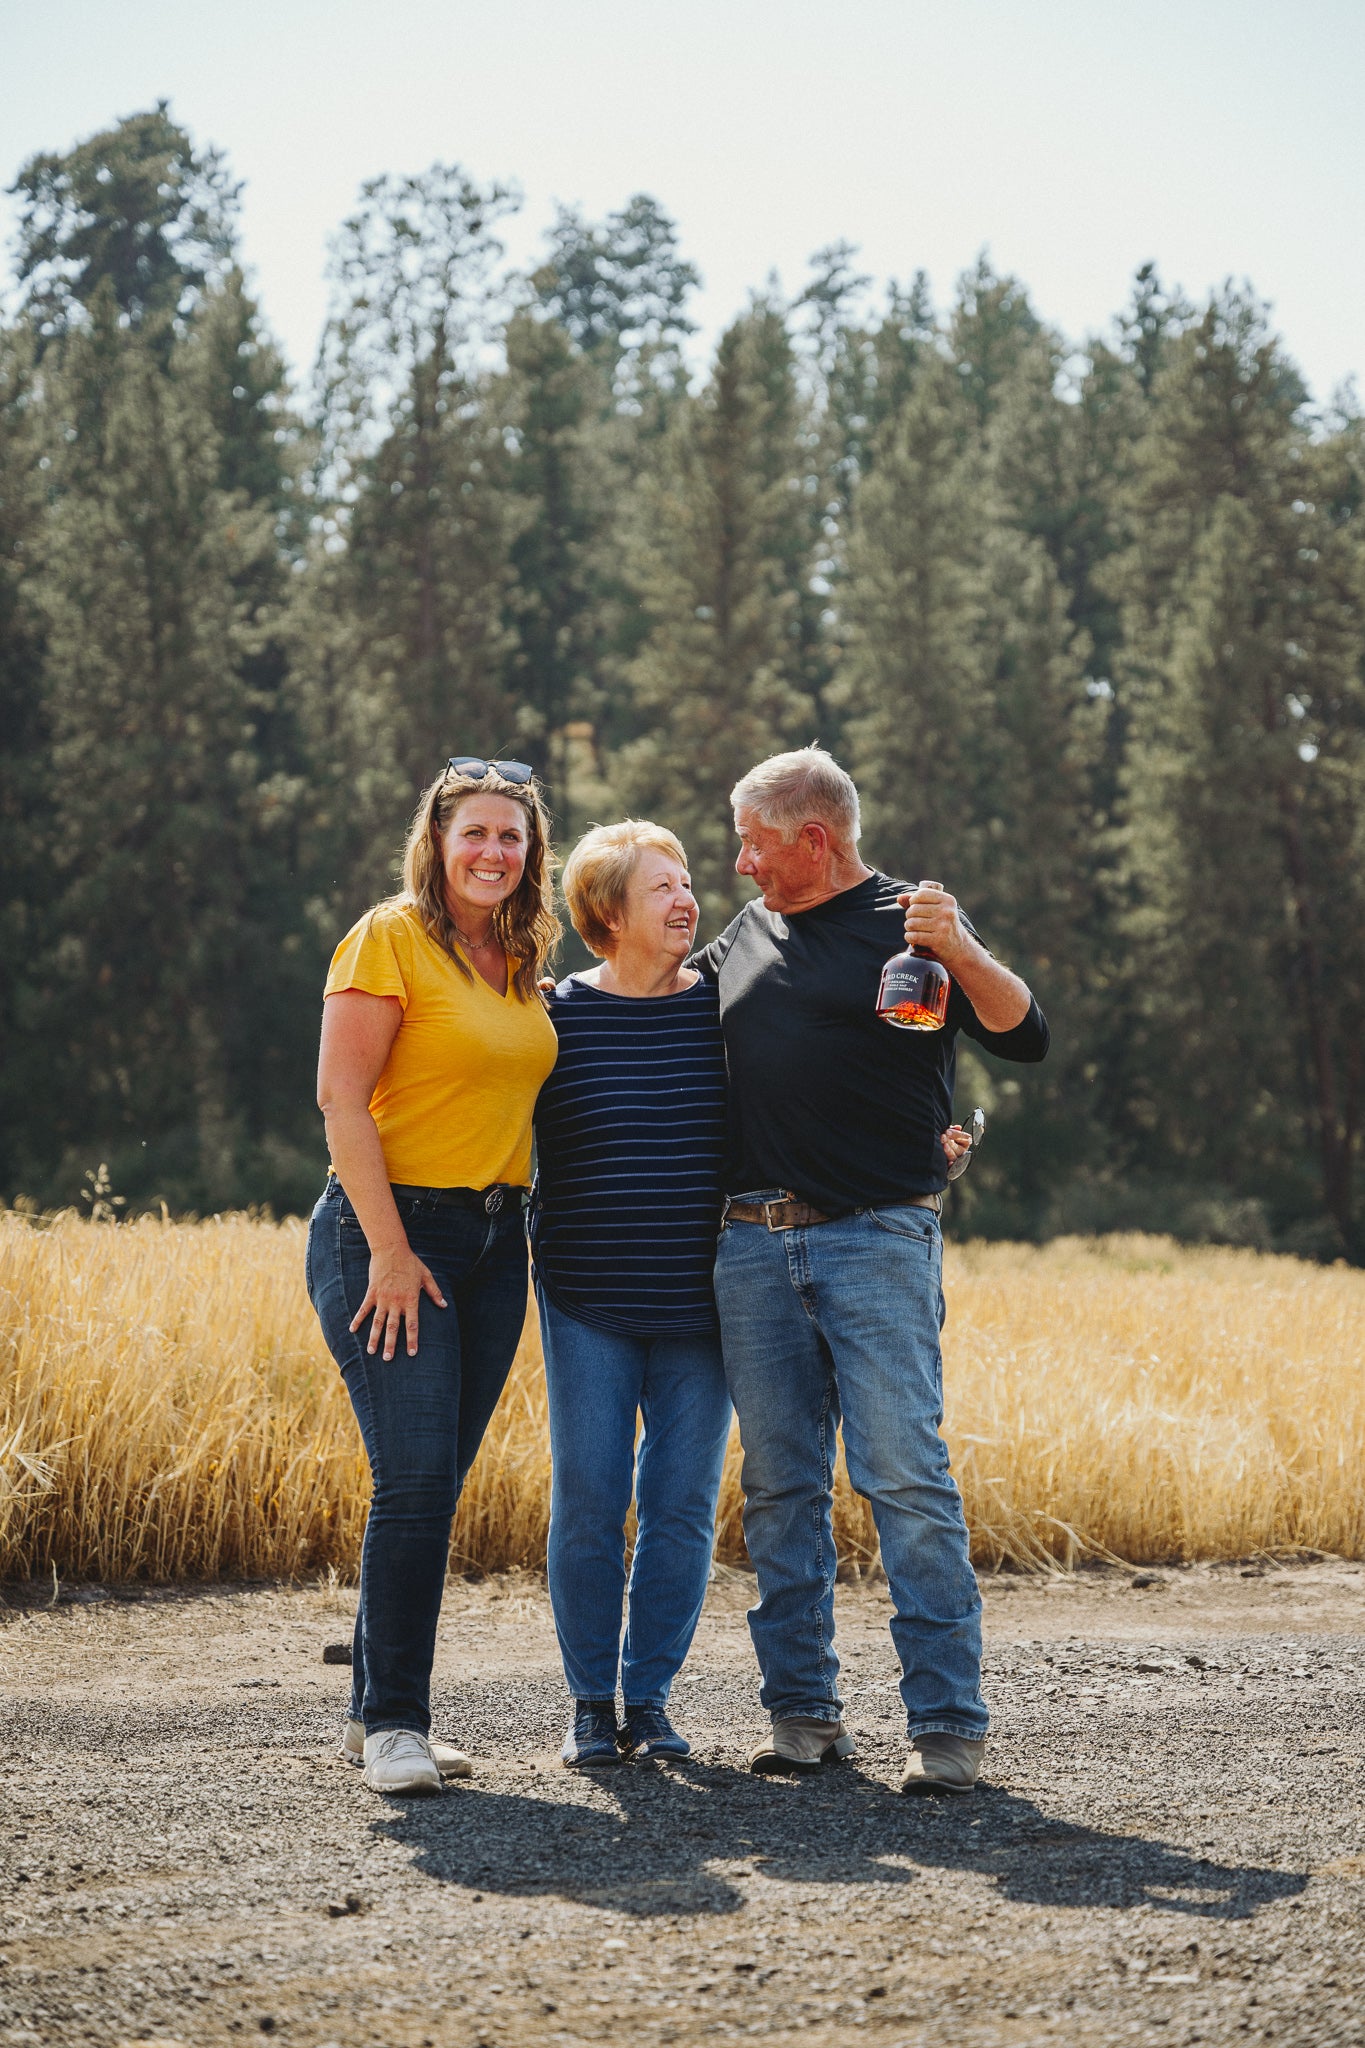 Photo of Bill Myers, and family, of Joseph's Grainery in Colfax, Washington. Bill is holding a bottle of Bird Creek Whiskey.